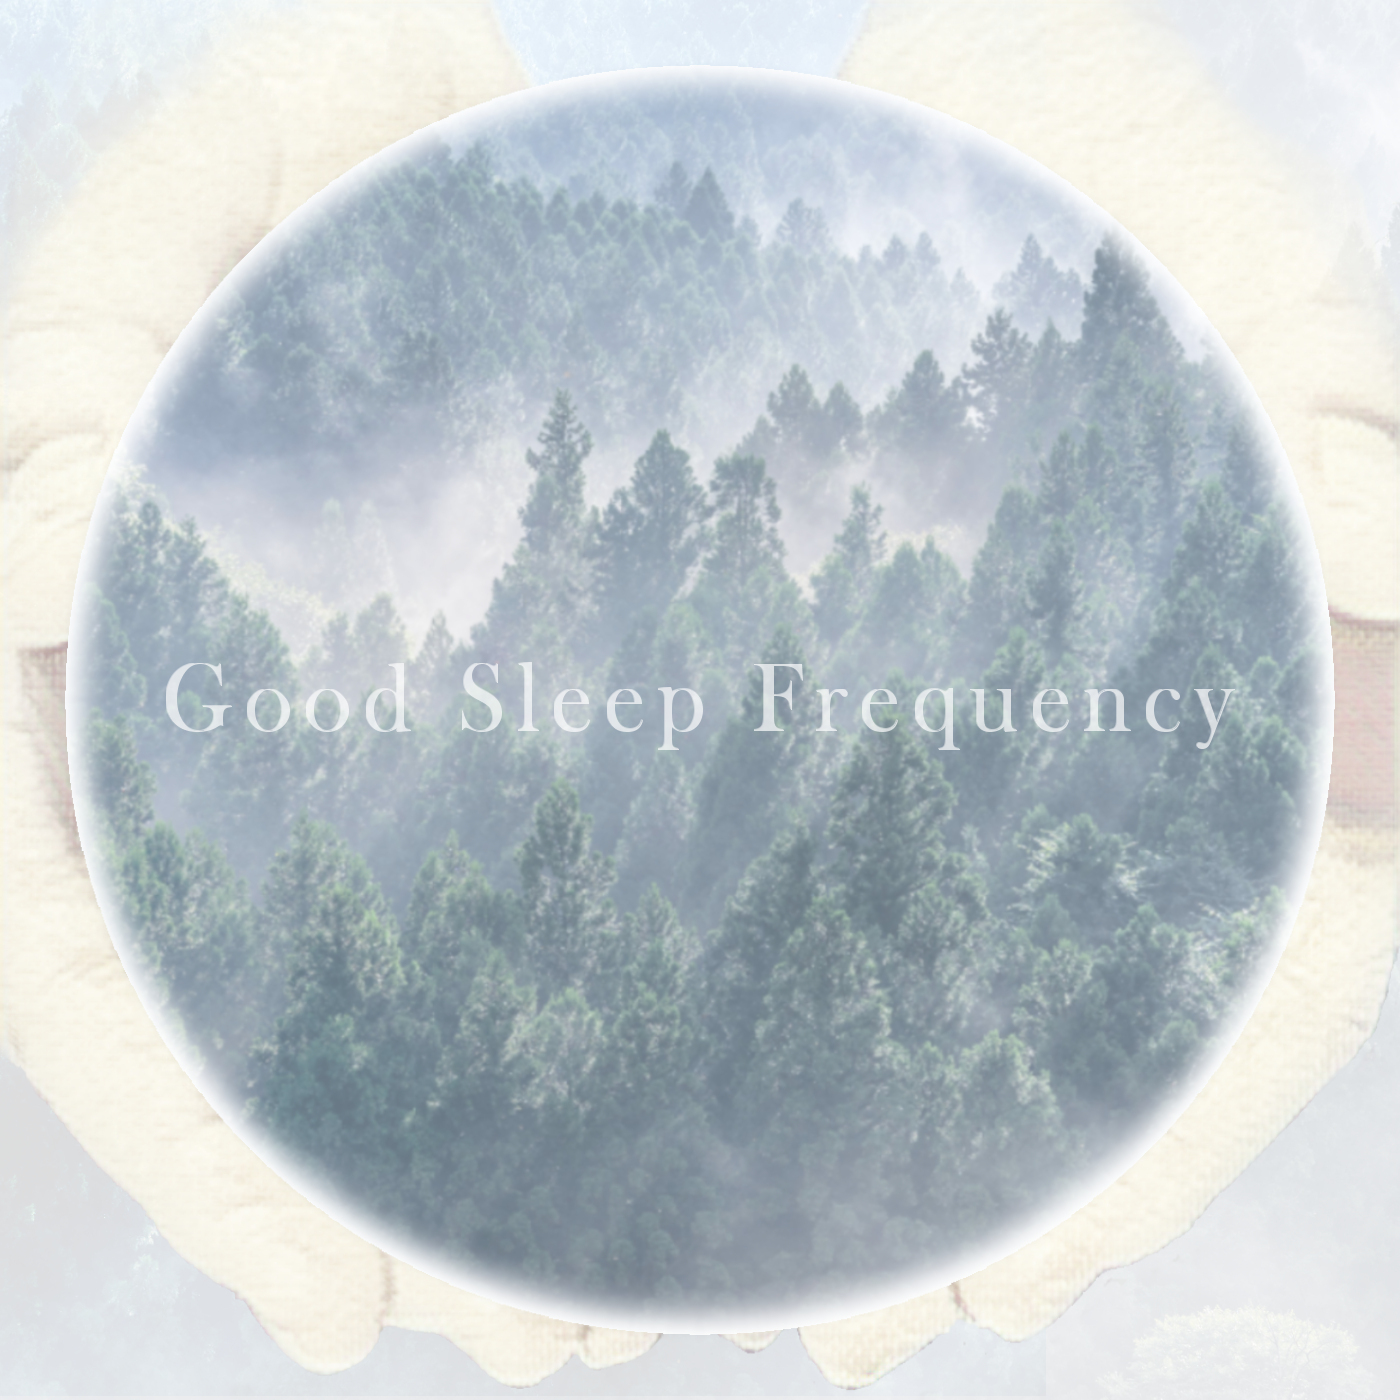 Good Sleep Frequency - Forest frequency_Alubum Art